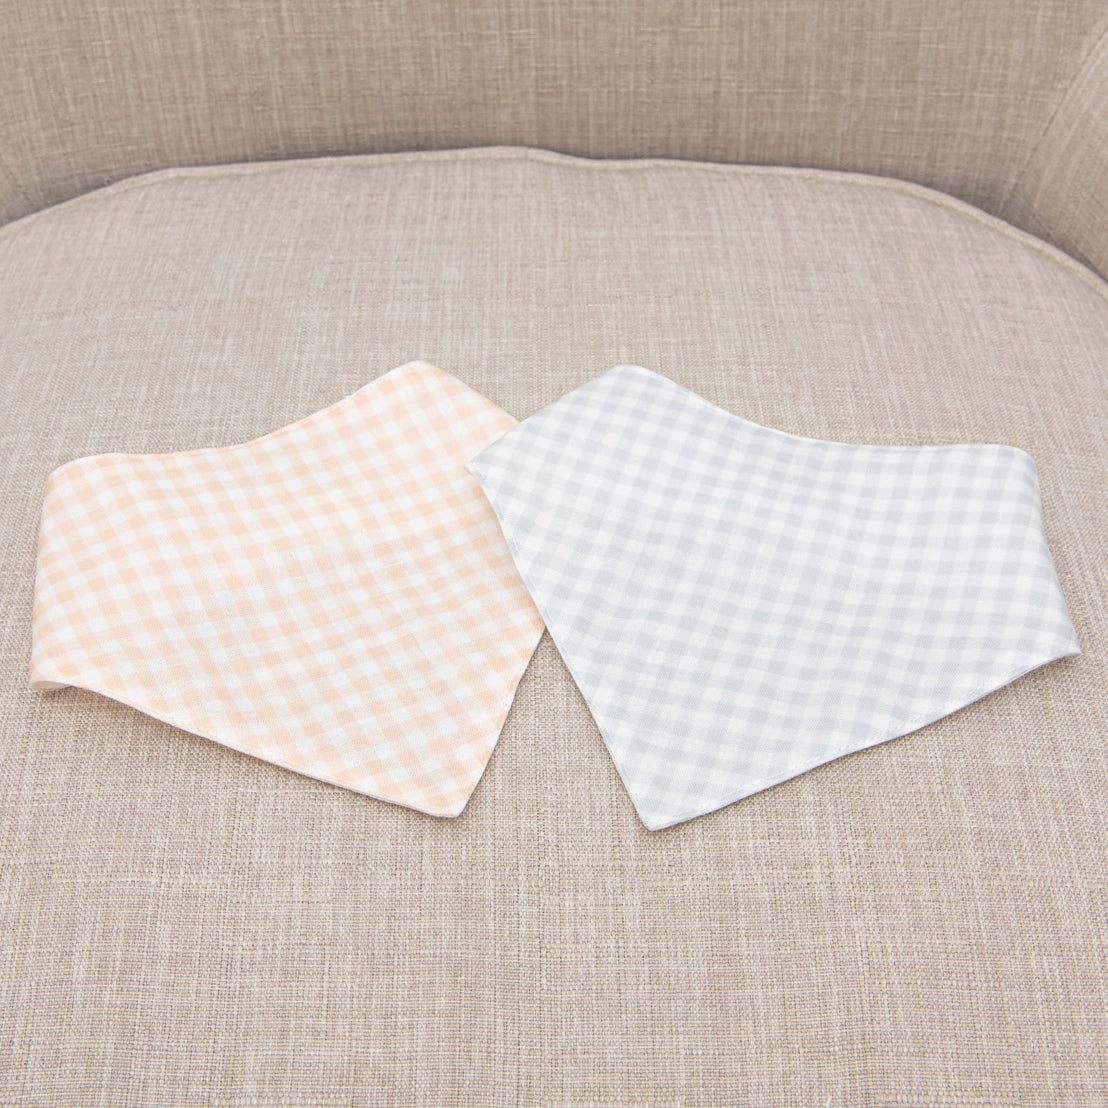 Two Ian Bandana Bibs with traditional checkered patterns, one peach and the other light blue, laid on a grey sofa.